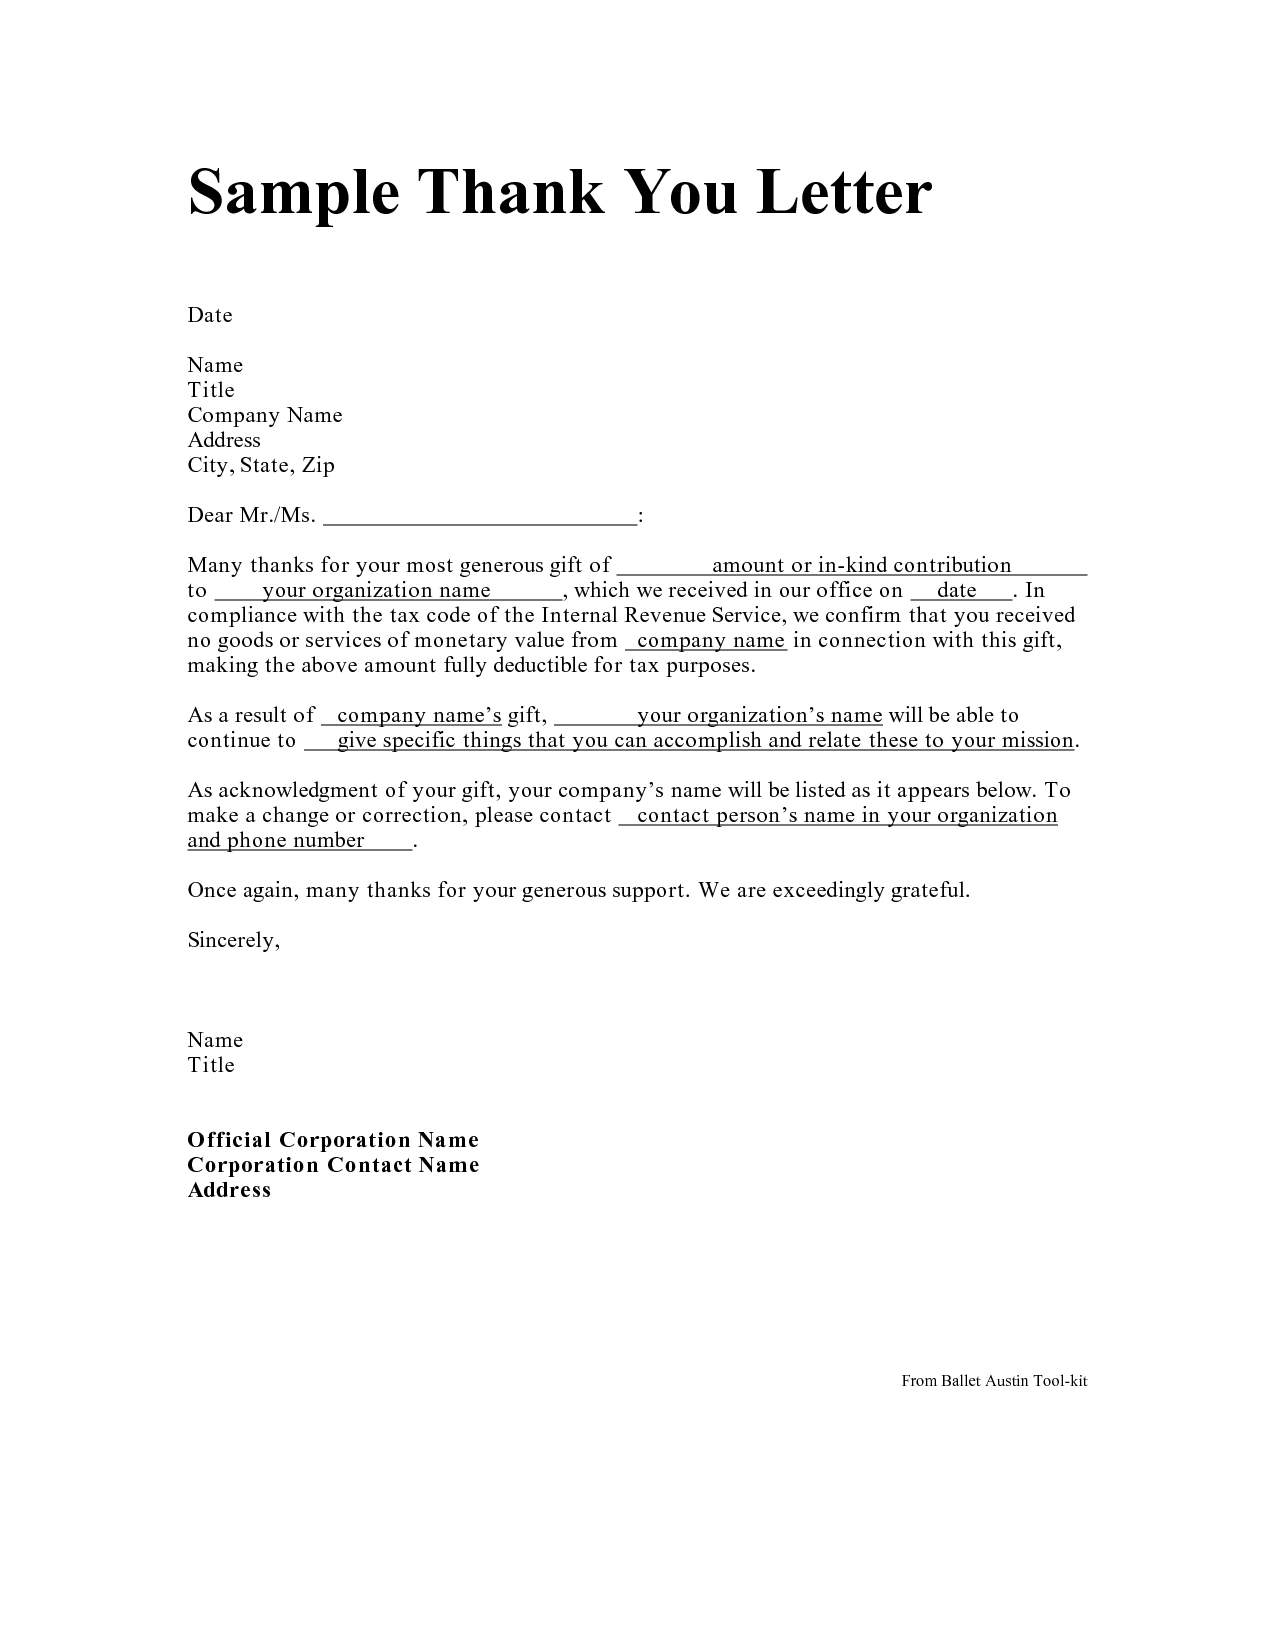 Tax Write Off Donation Letter Template - Personal Thank You Letter Personal Thank You Letter Samples